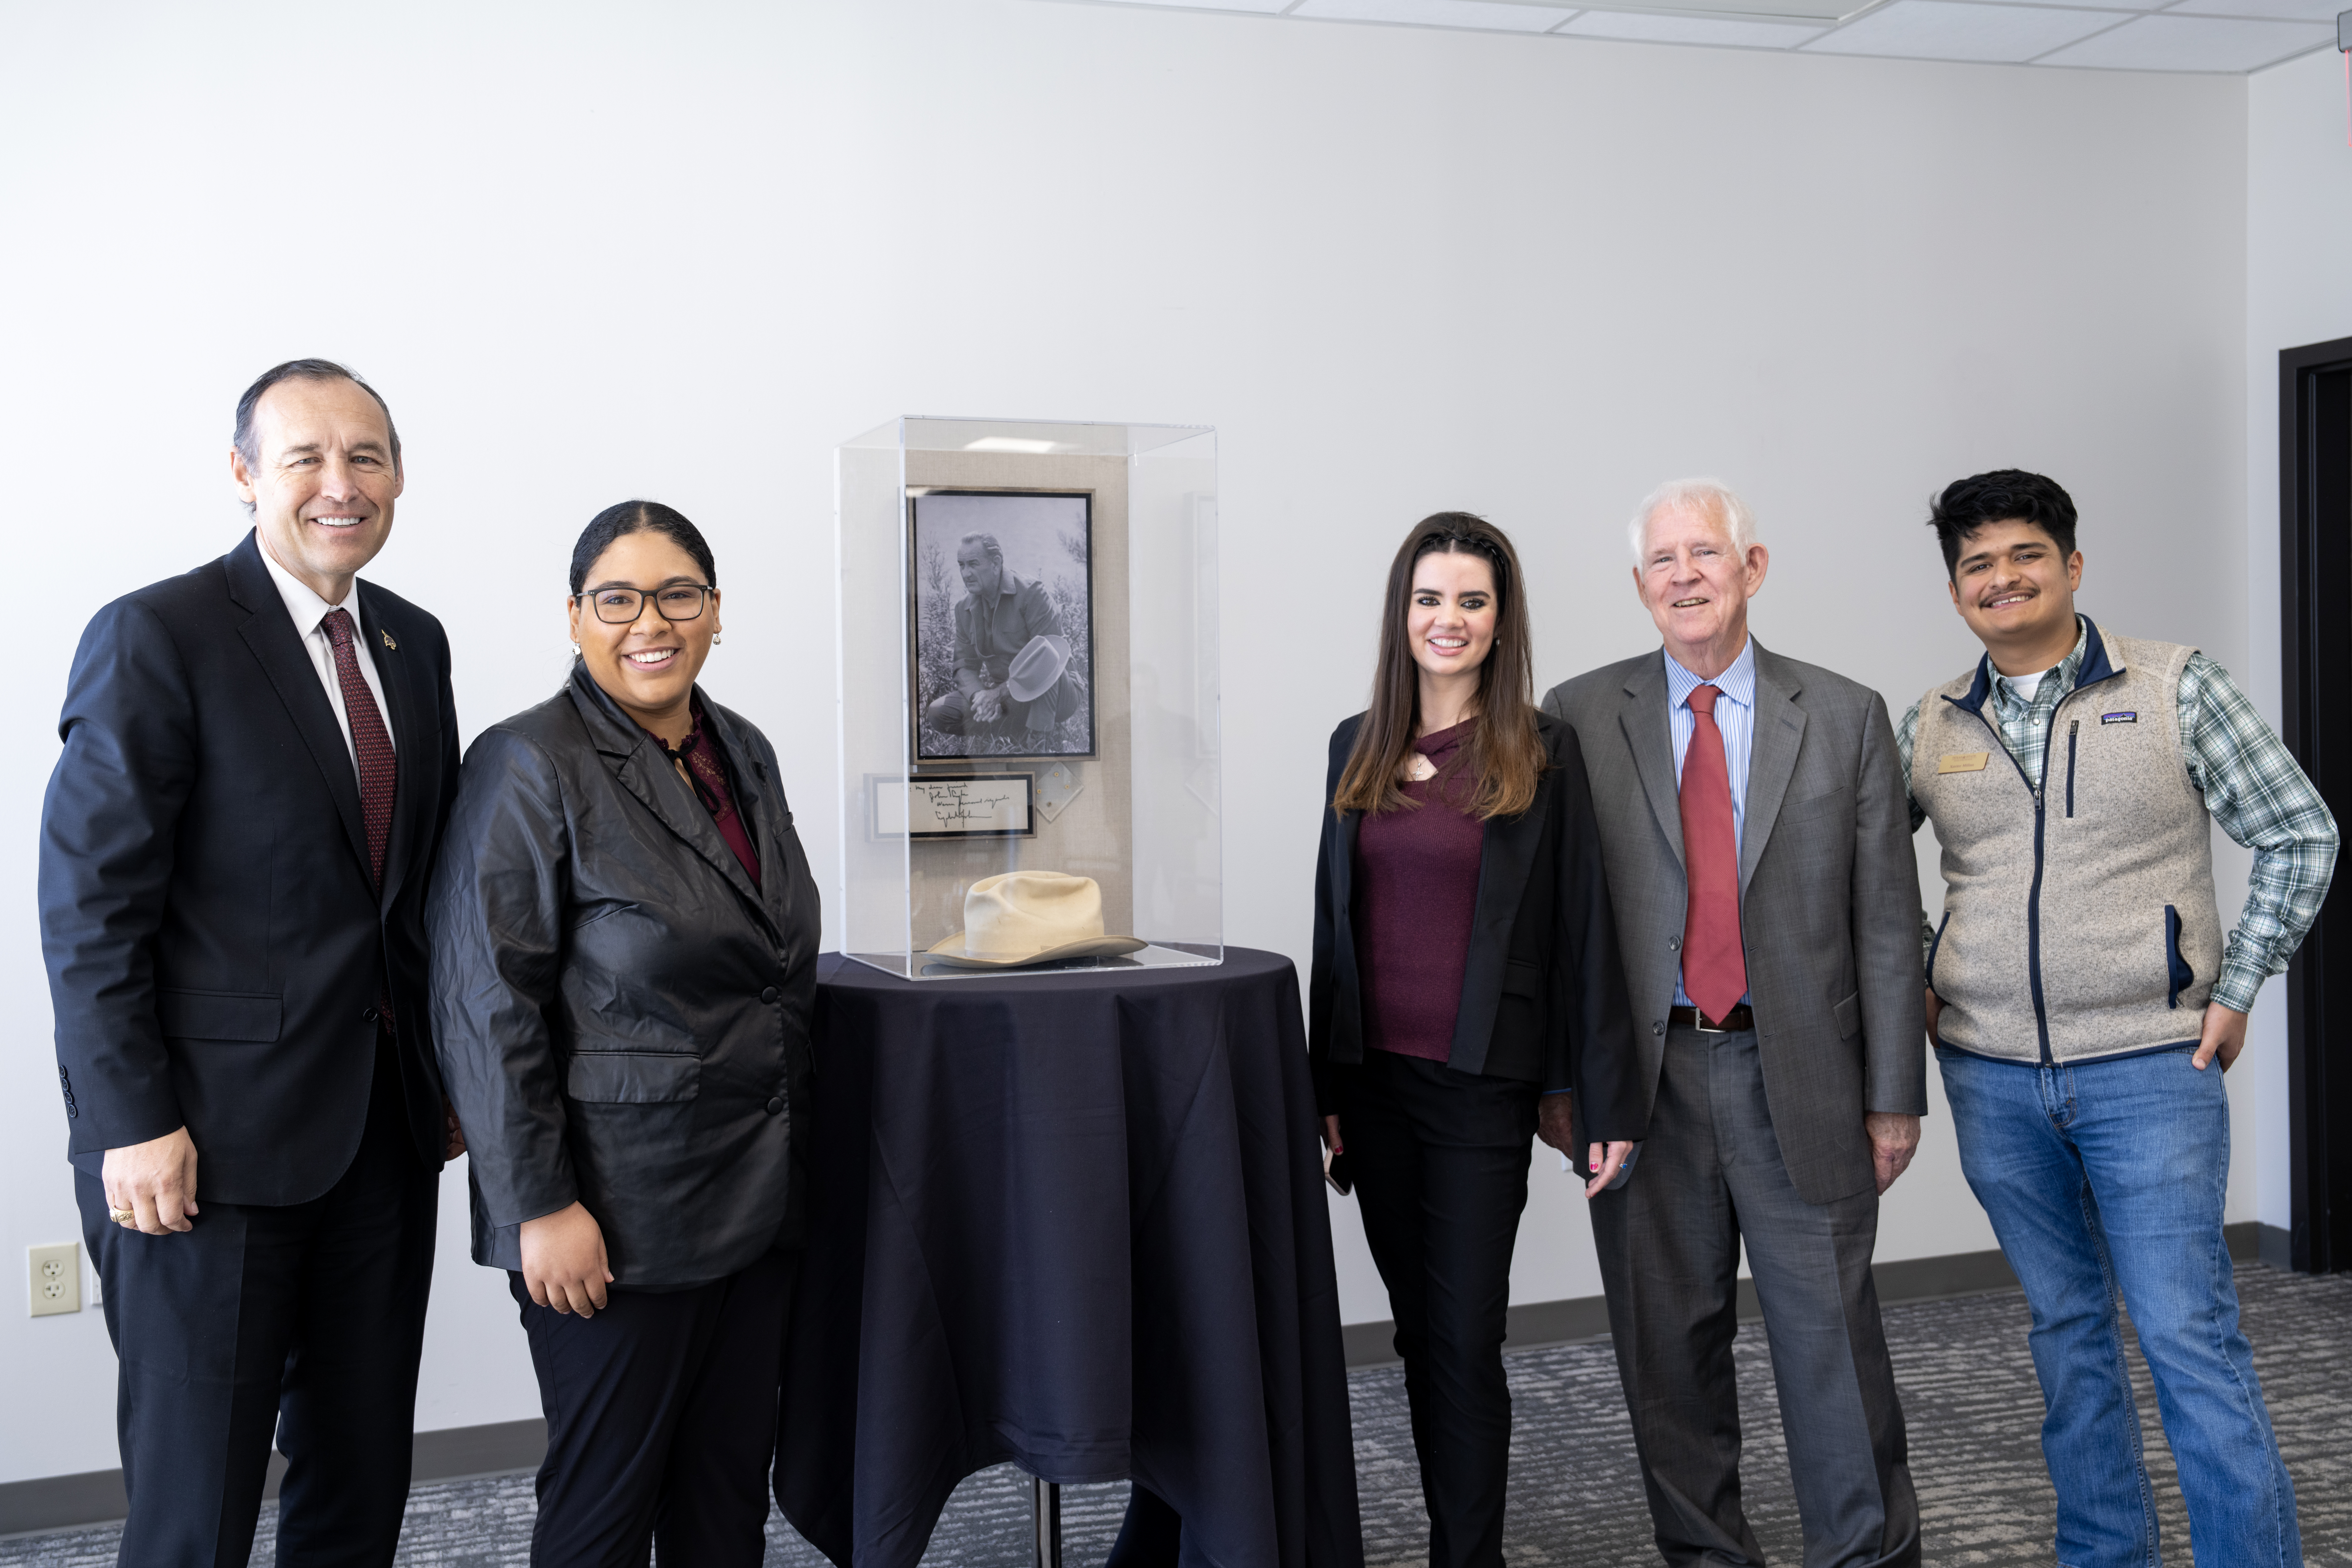 (Left to right) TXST President Kelly Damphousse, Lauren Green (Gold Star Society), Kiersten Florence (President of Student Government), Kevin Moomaw, Xavier Millan (Gold Star Society) pose next to LBJ's Stetson.